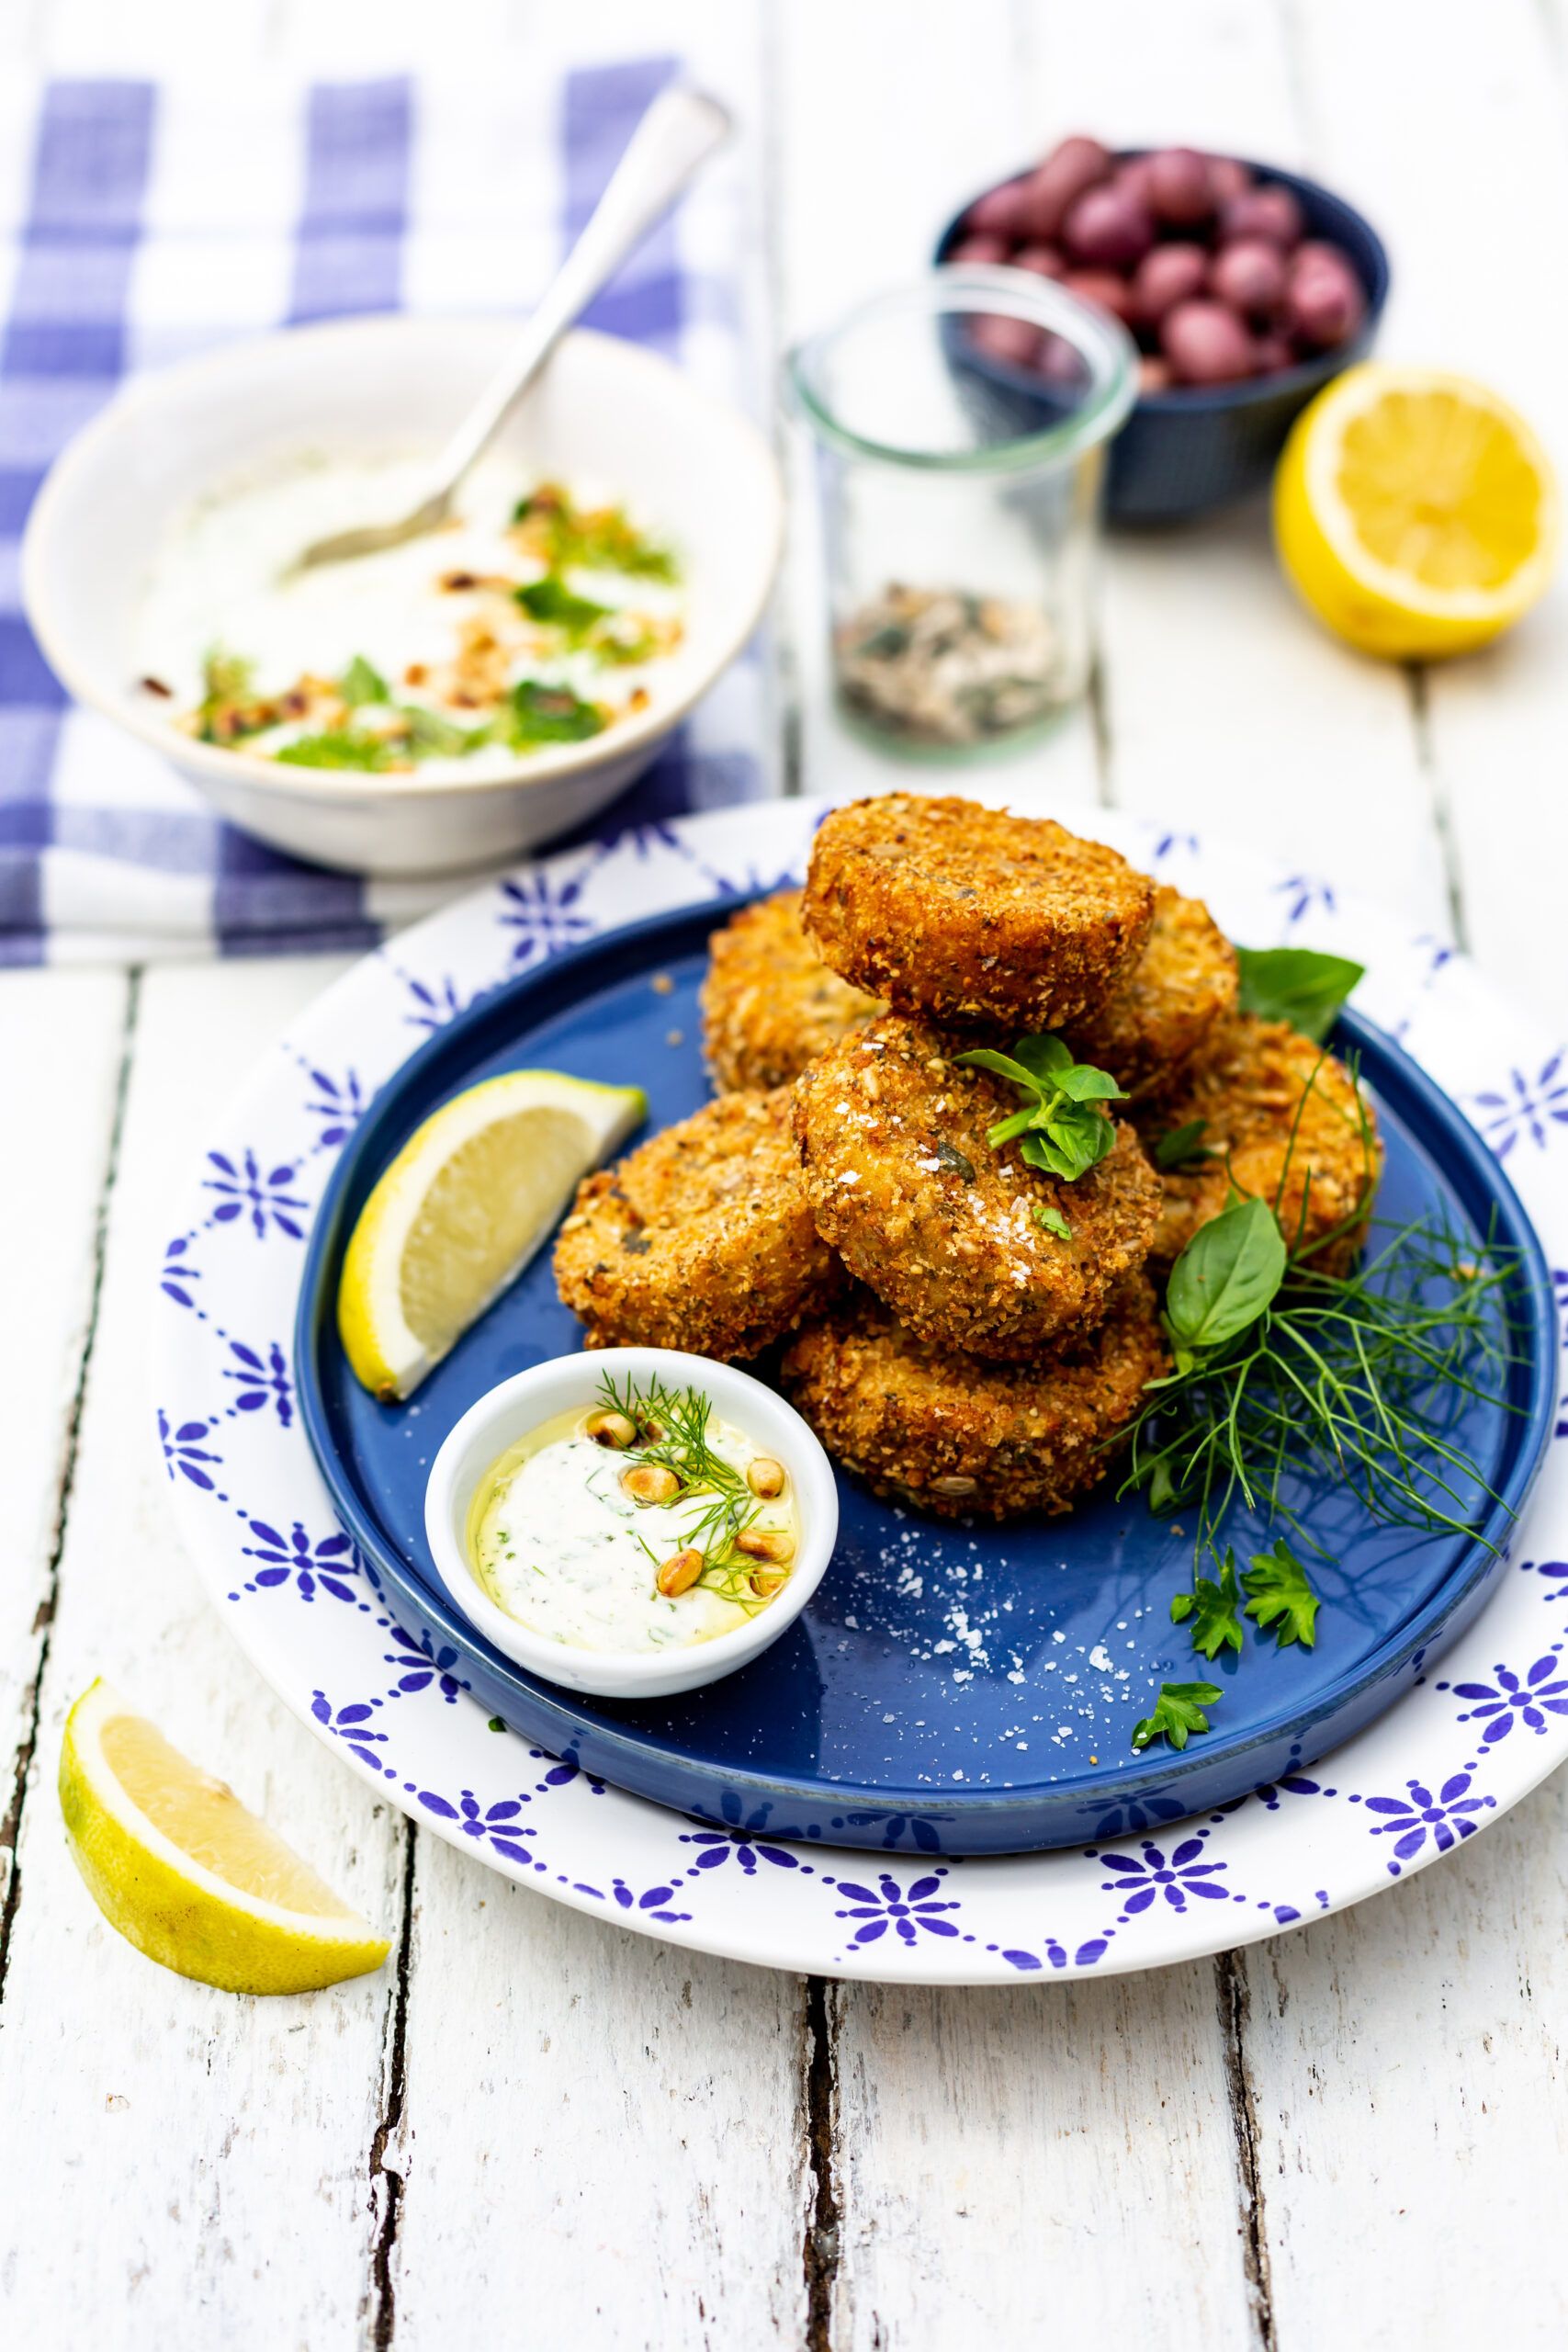 Orzo Prawn Cakes with Feta and Herb Sauce